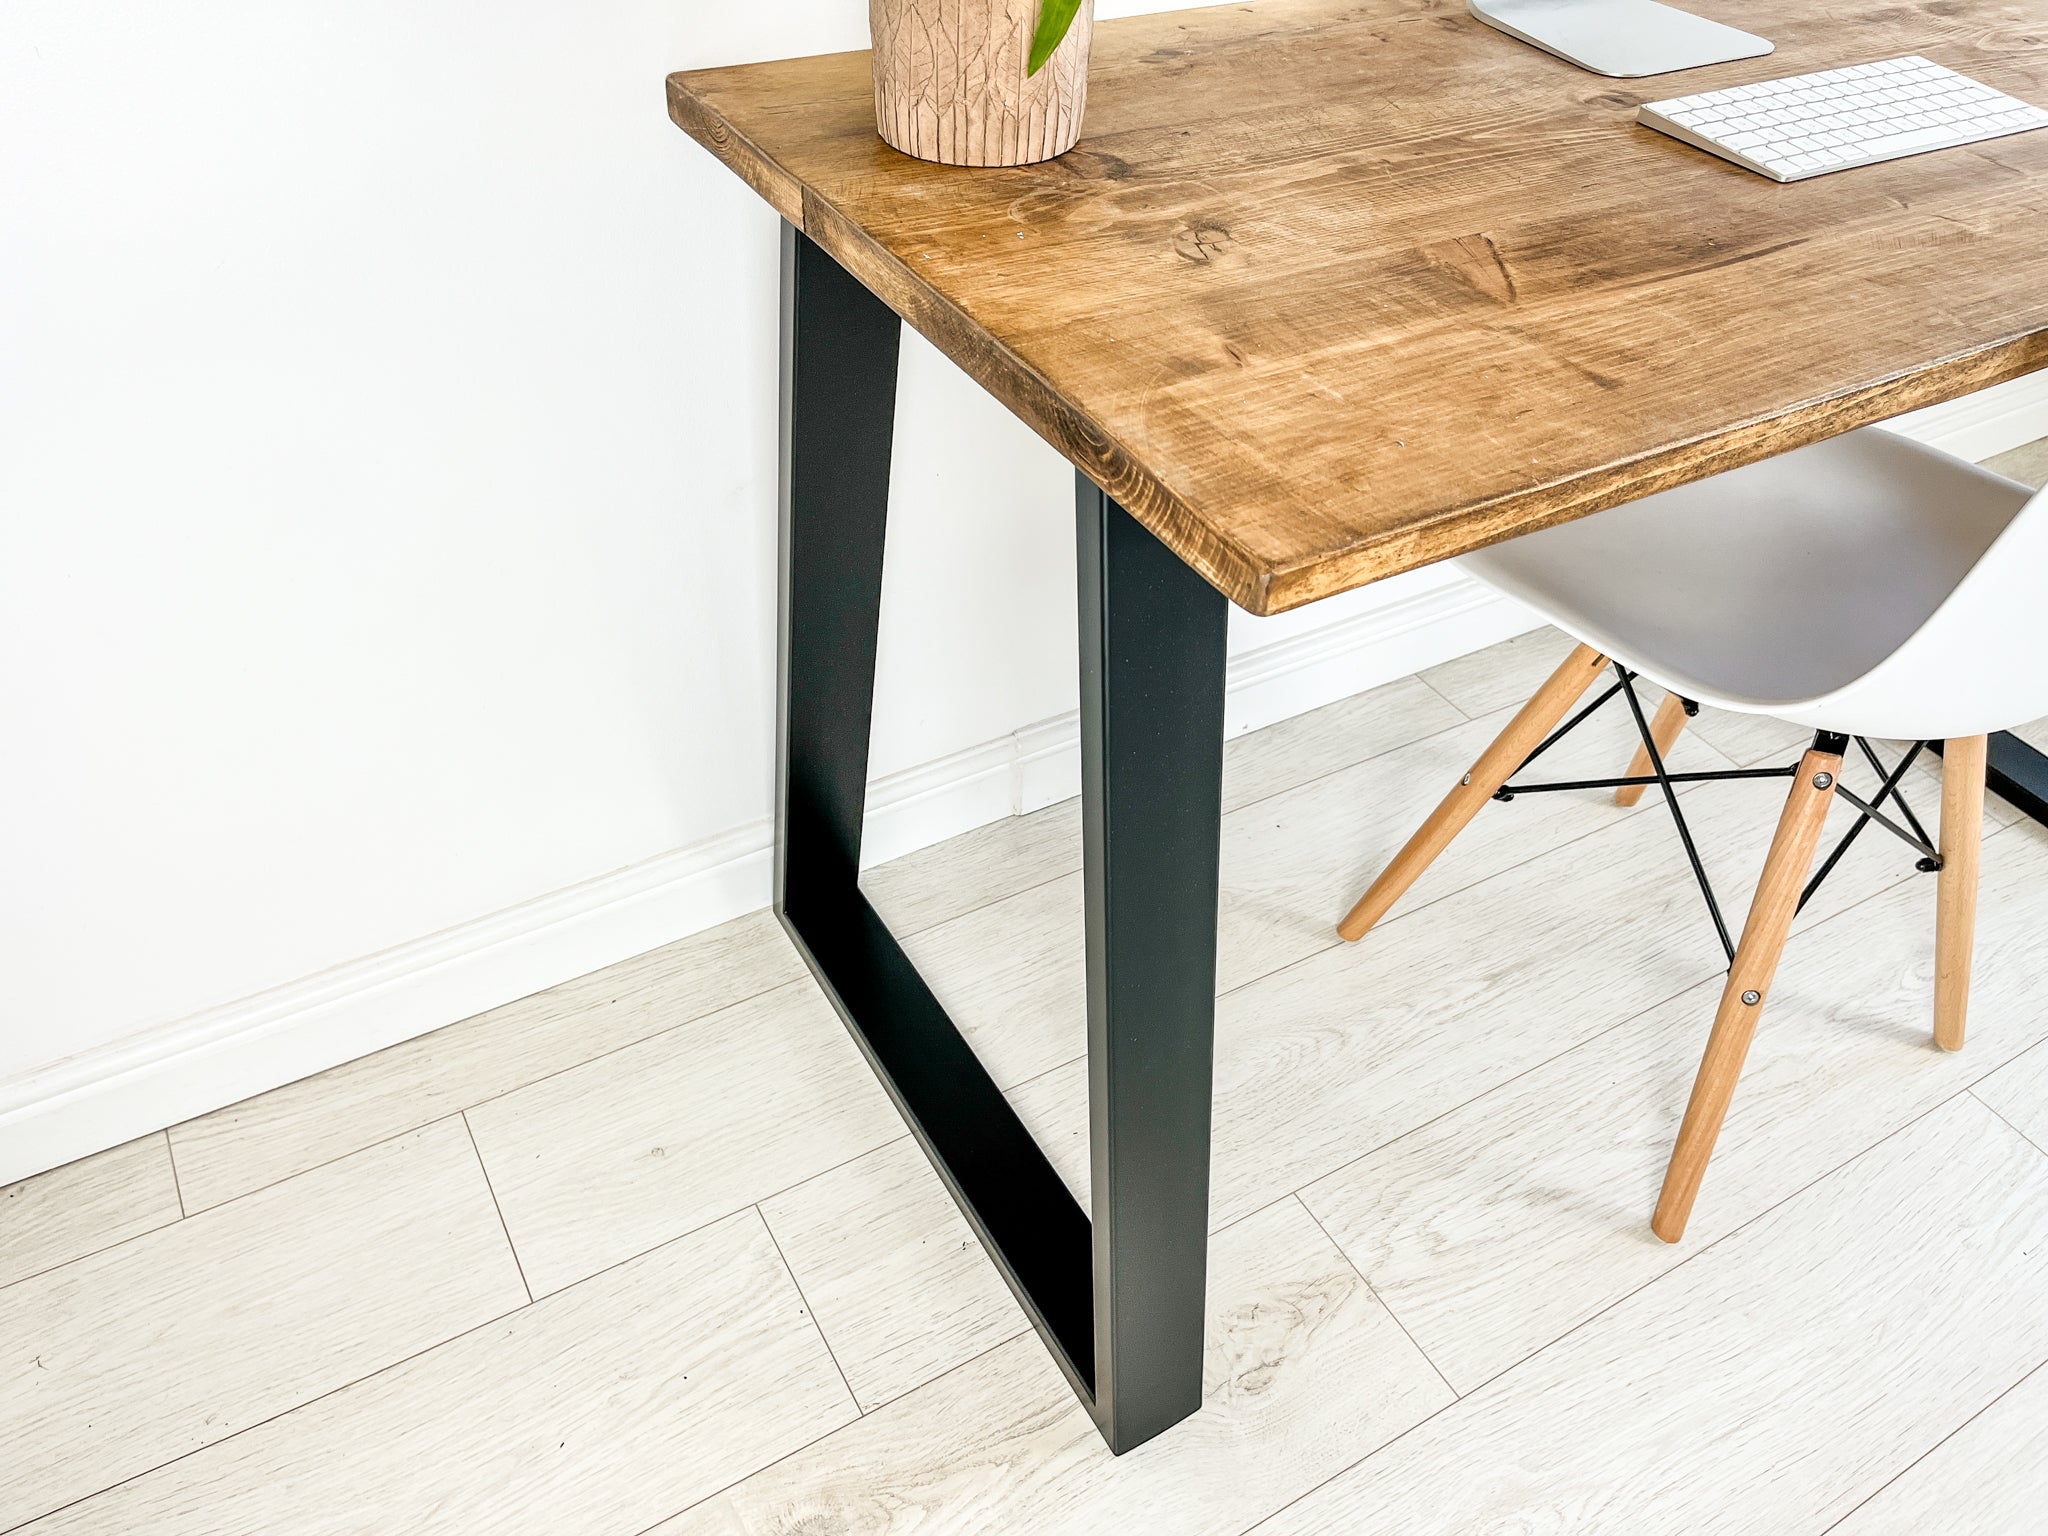 Rustic Wood Desk with Trapezium Steel Frame Legs